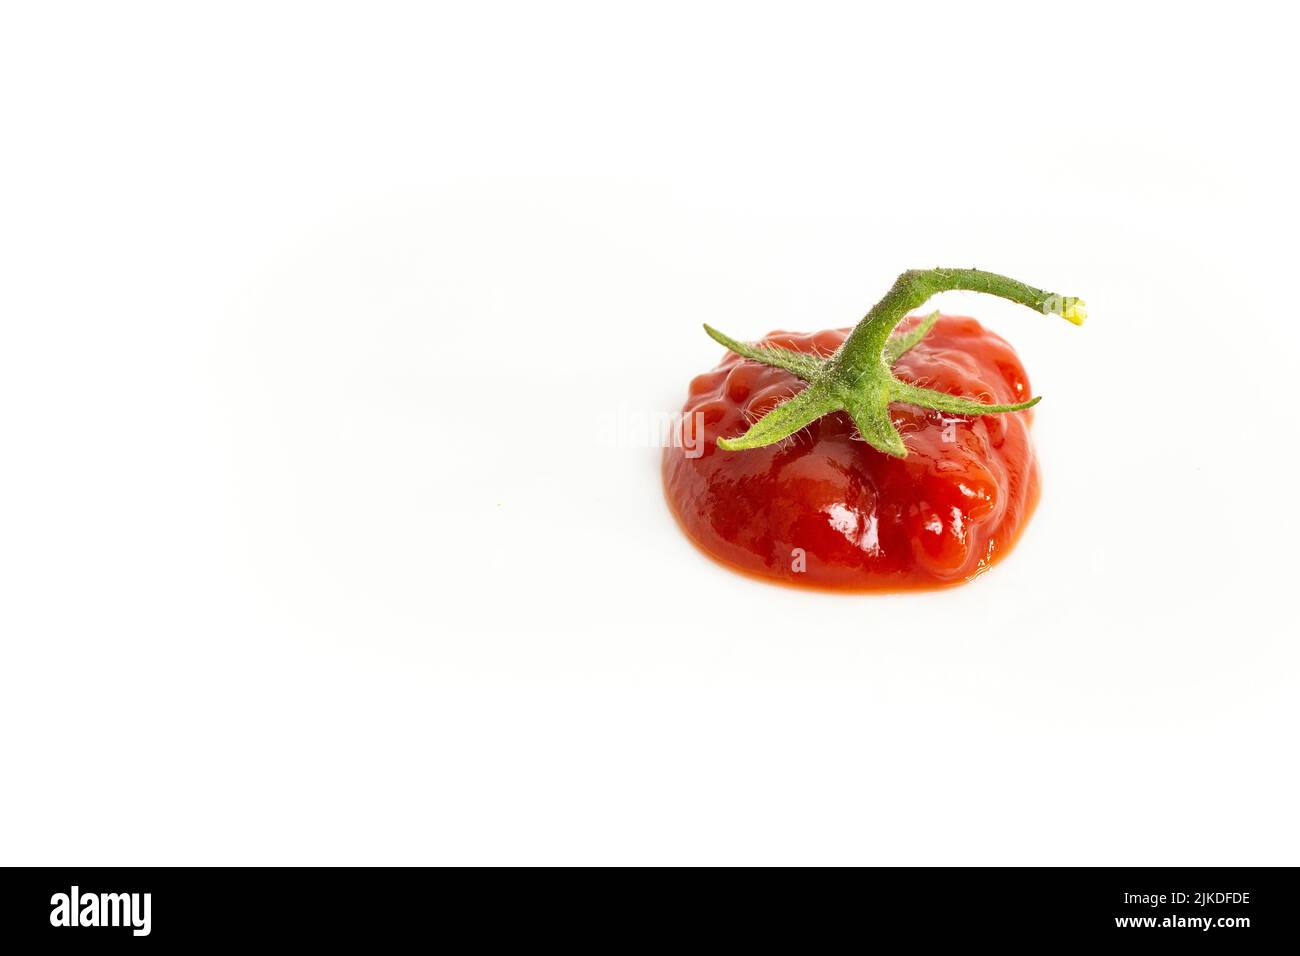 Ketchup blob with a star shaped tomato stem, isolated on white background Stock Photo